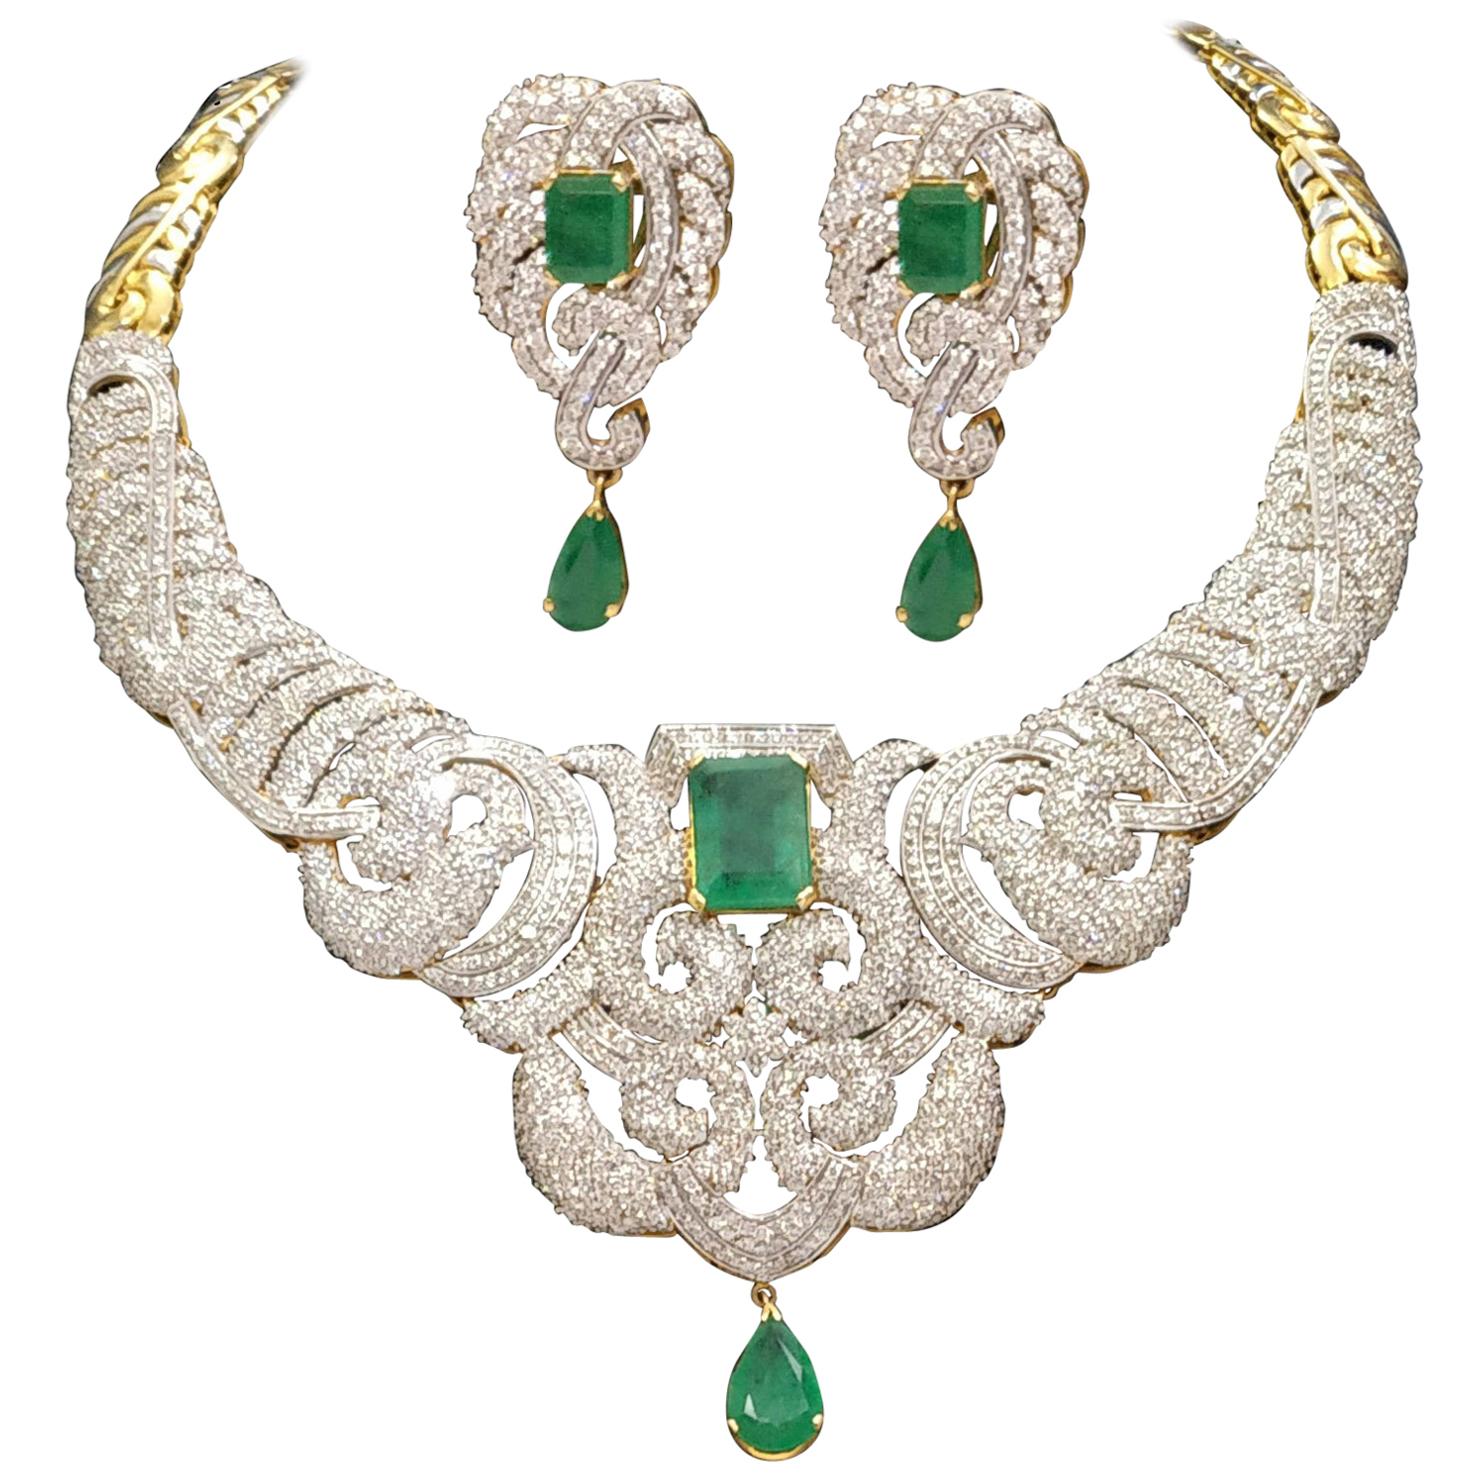 42 Carat Diamonds and 25 Carat Emerald Necklace and Earrings Set For Sale